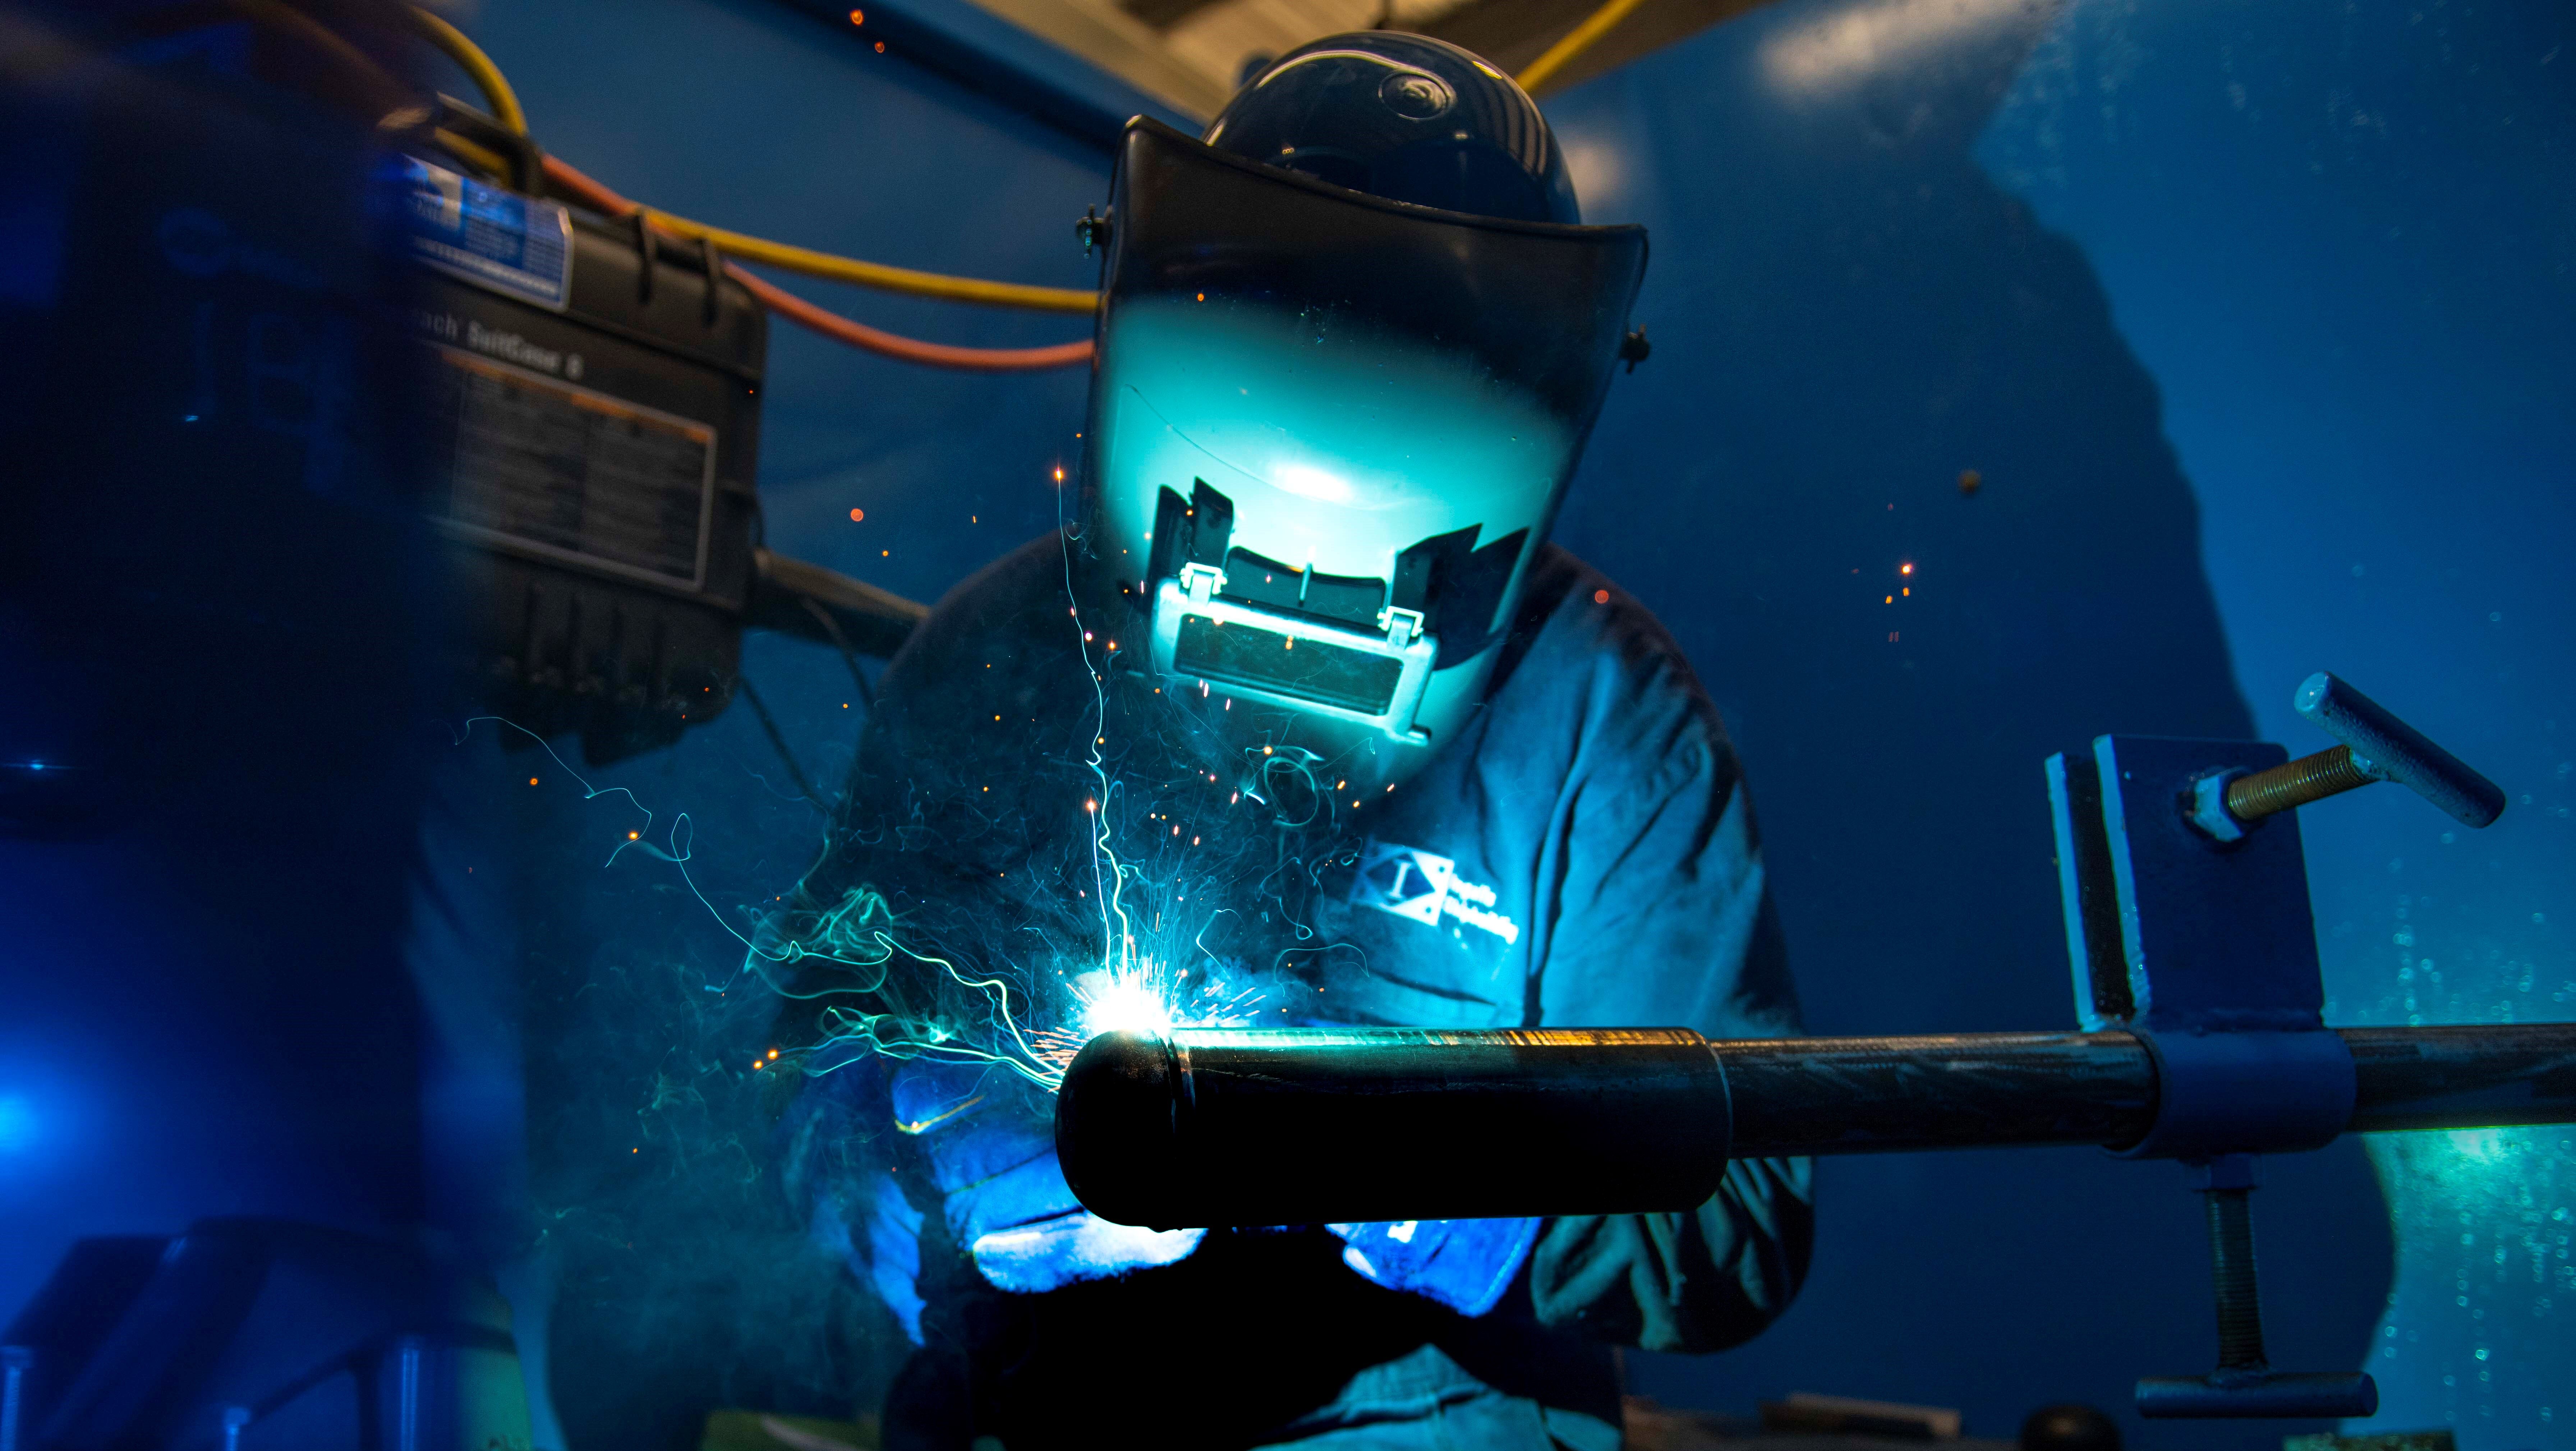 Project Mfg Welding Competition At Ingalls Shipbuilding 1